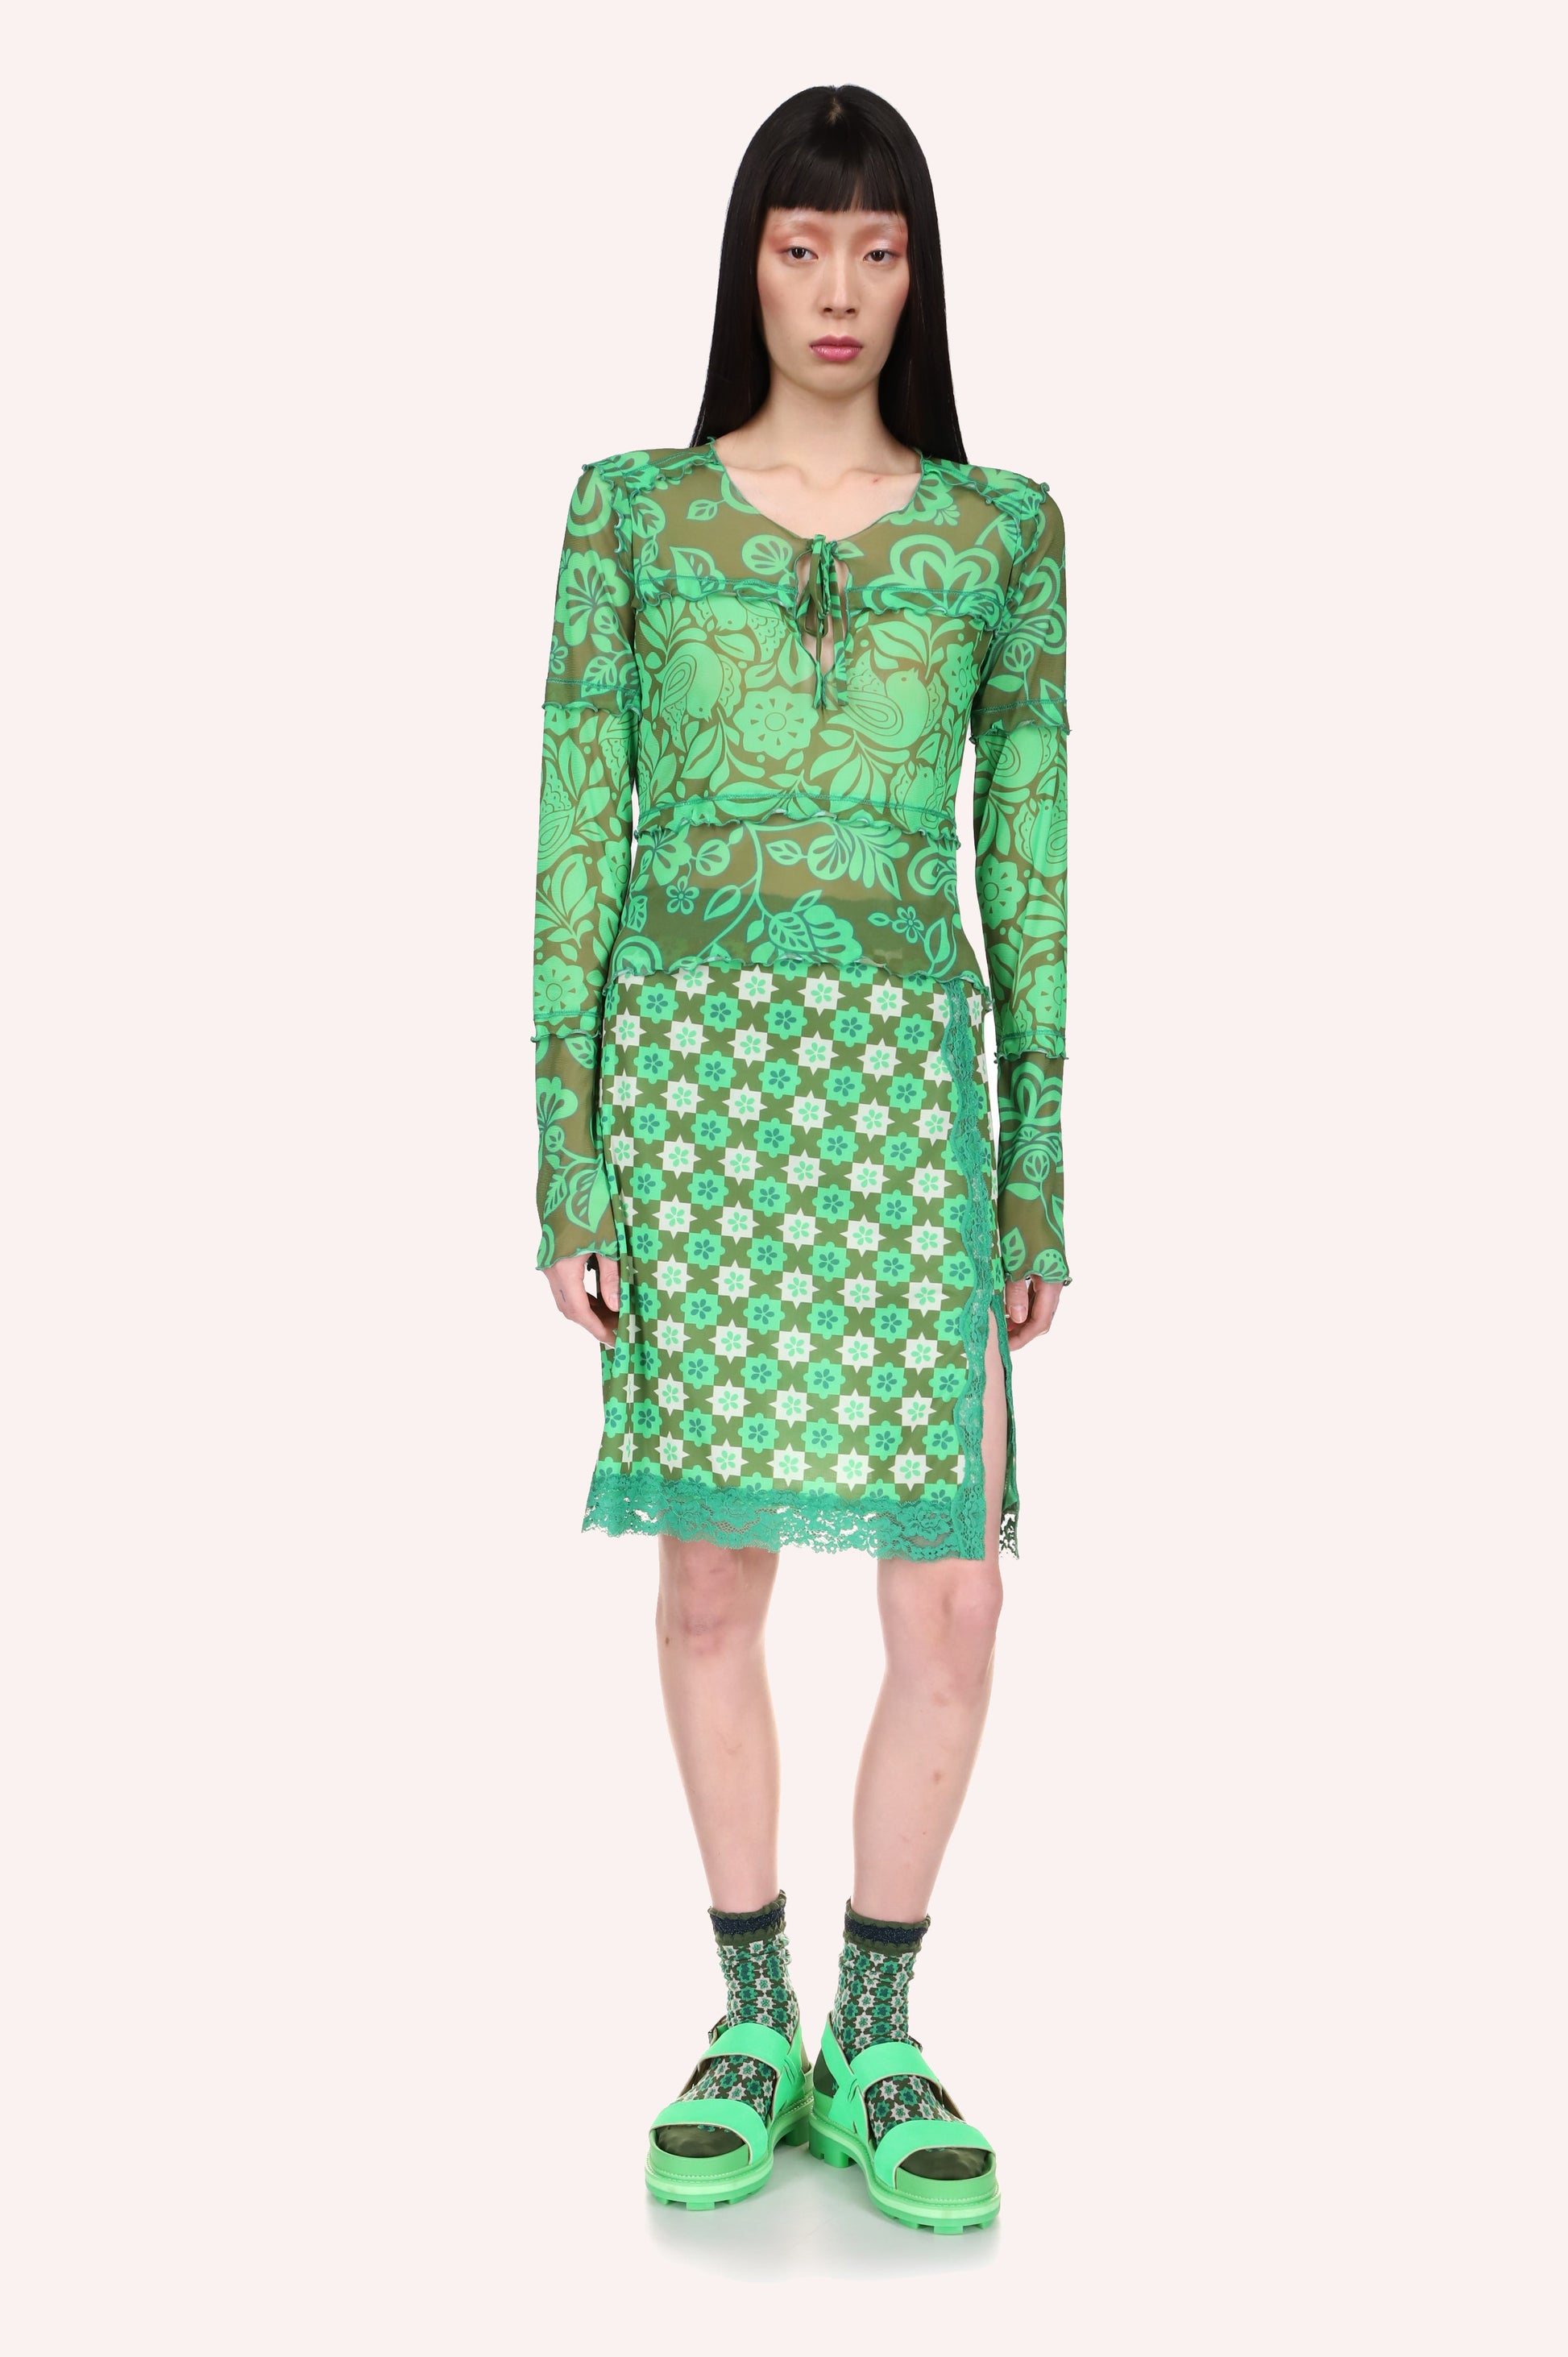 Combo Mesh Top glo green, long sleeves, floral design, hips long, ribbon knot to close the V collar